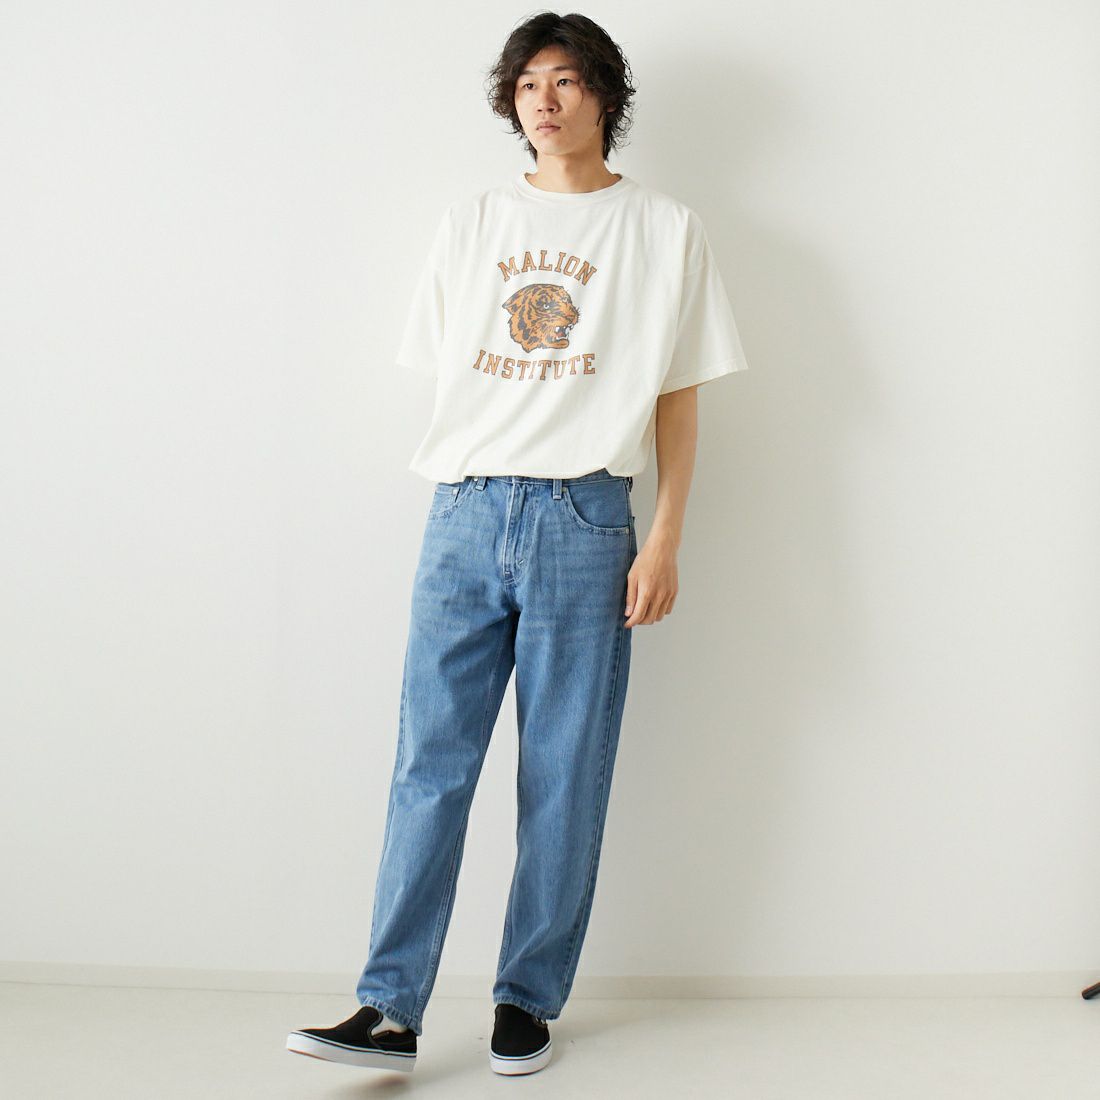 REMI RELIEF [レミレリーフ] 別注 20天竺プリントTシャツ MALION [RN24329254-JF] OFF &&モデル身長：182cm 着用サイズ：M&&